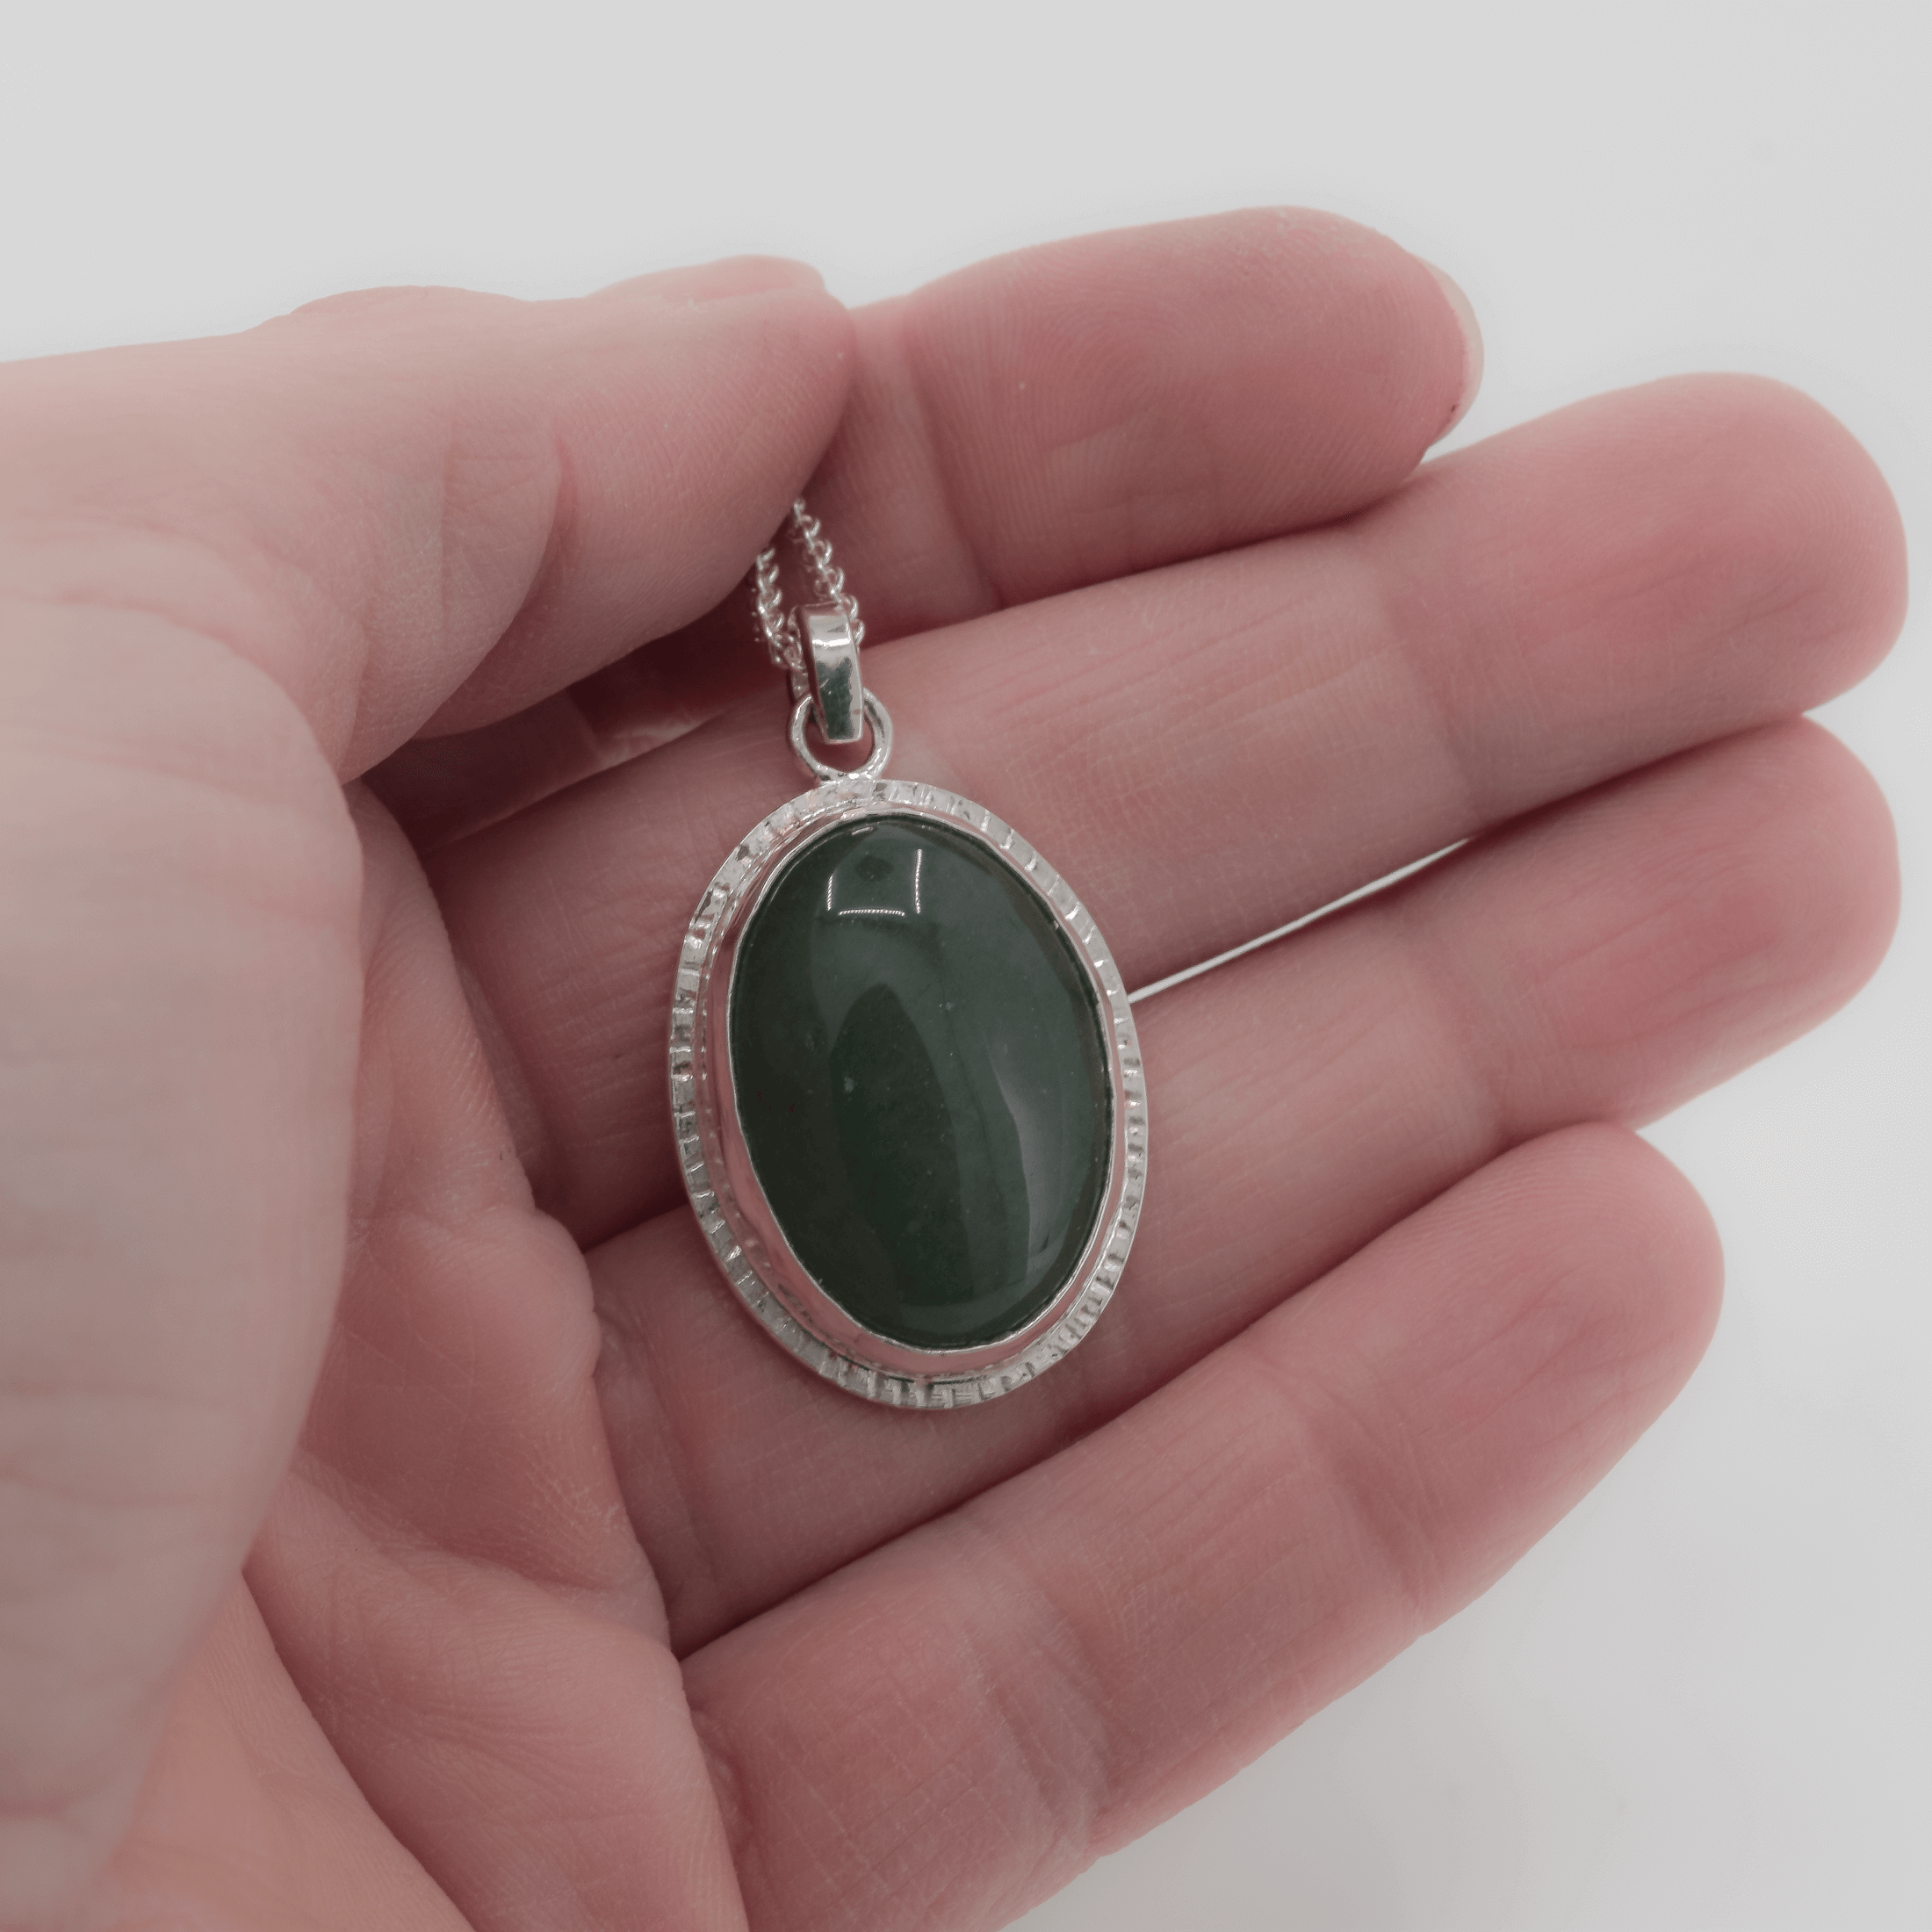 Green jade oval pendant with line textures around the edge of the bezel set stone shown in hand for scale